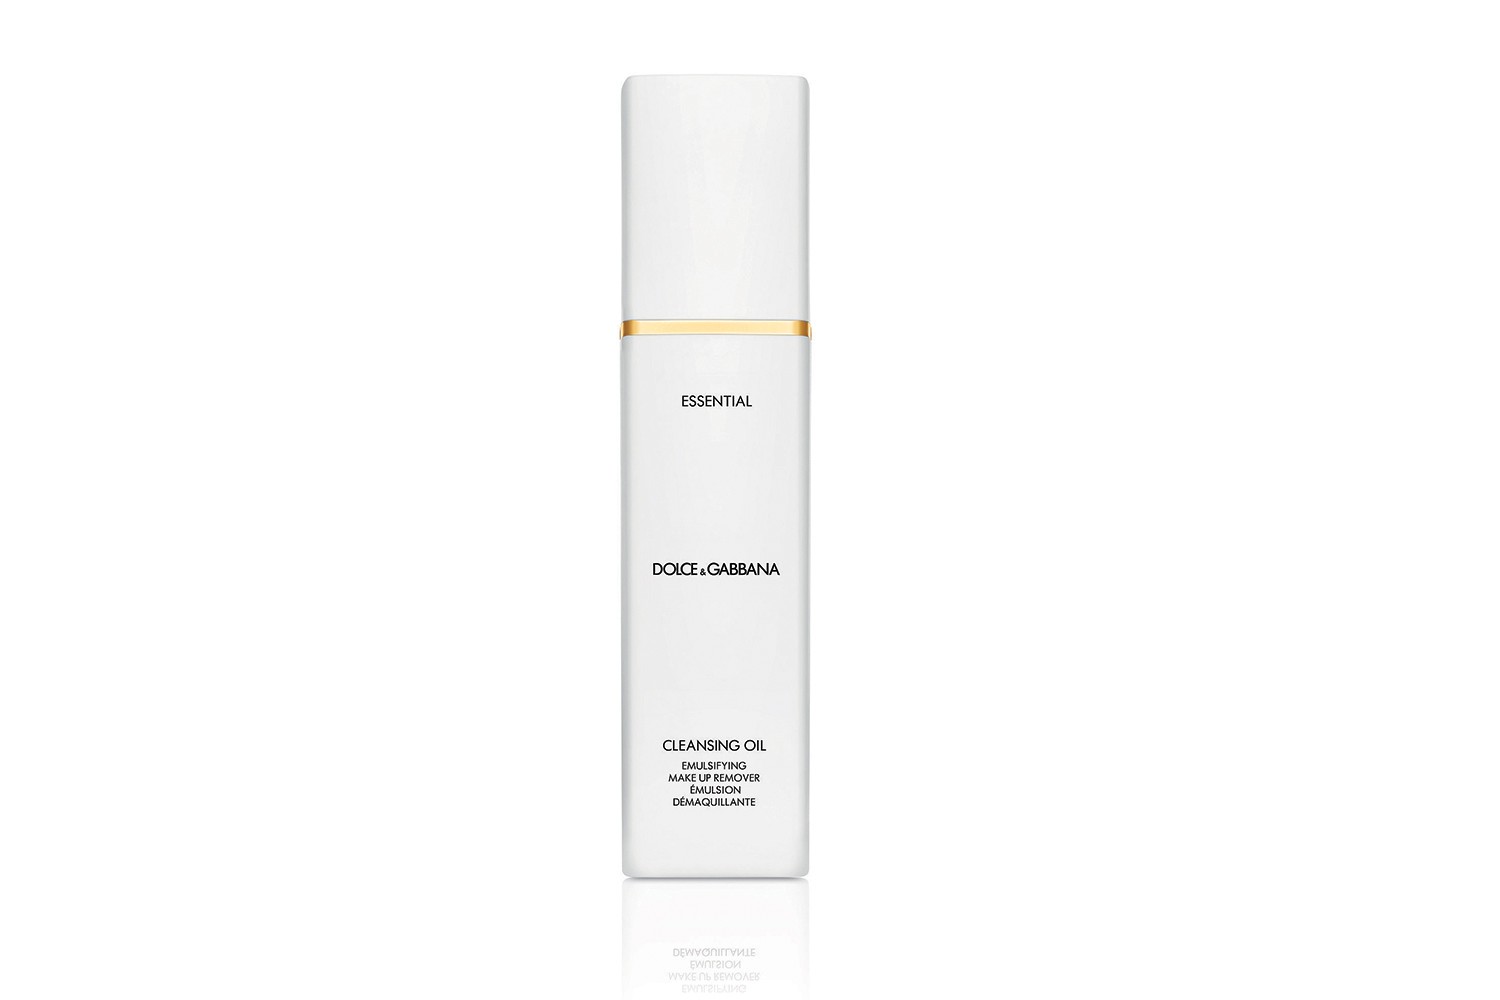 Essential Cleansing Oil, Dolce & Gabbana (US$ 50)